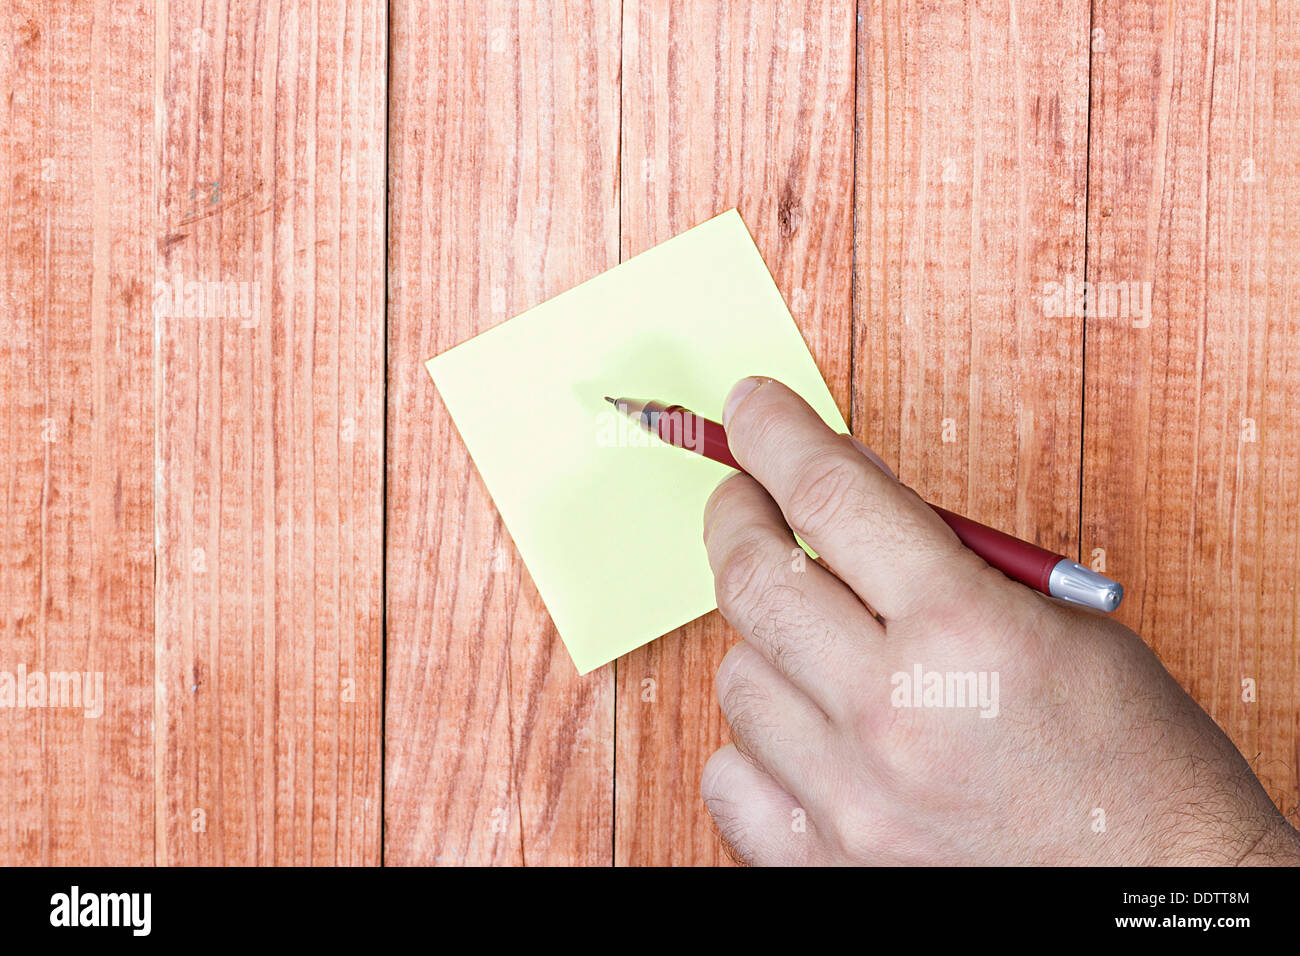 Blank note, paper stick, man's hand holding a pen, on wood background. Stock Photo